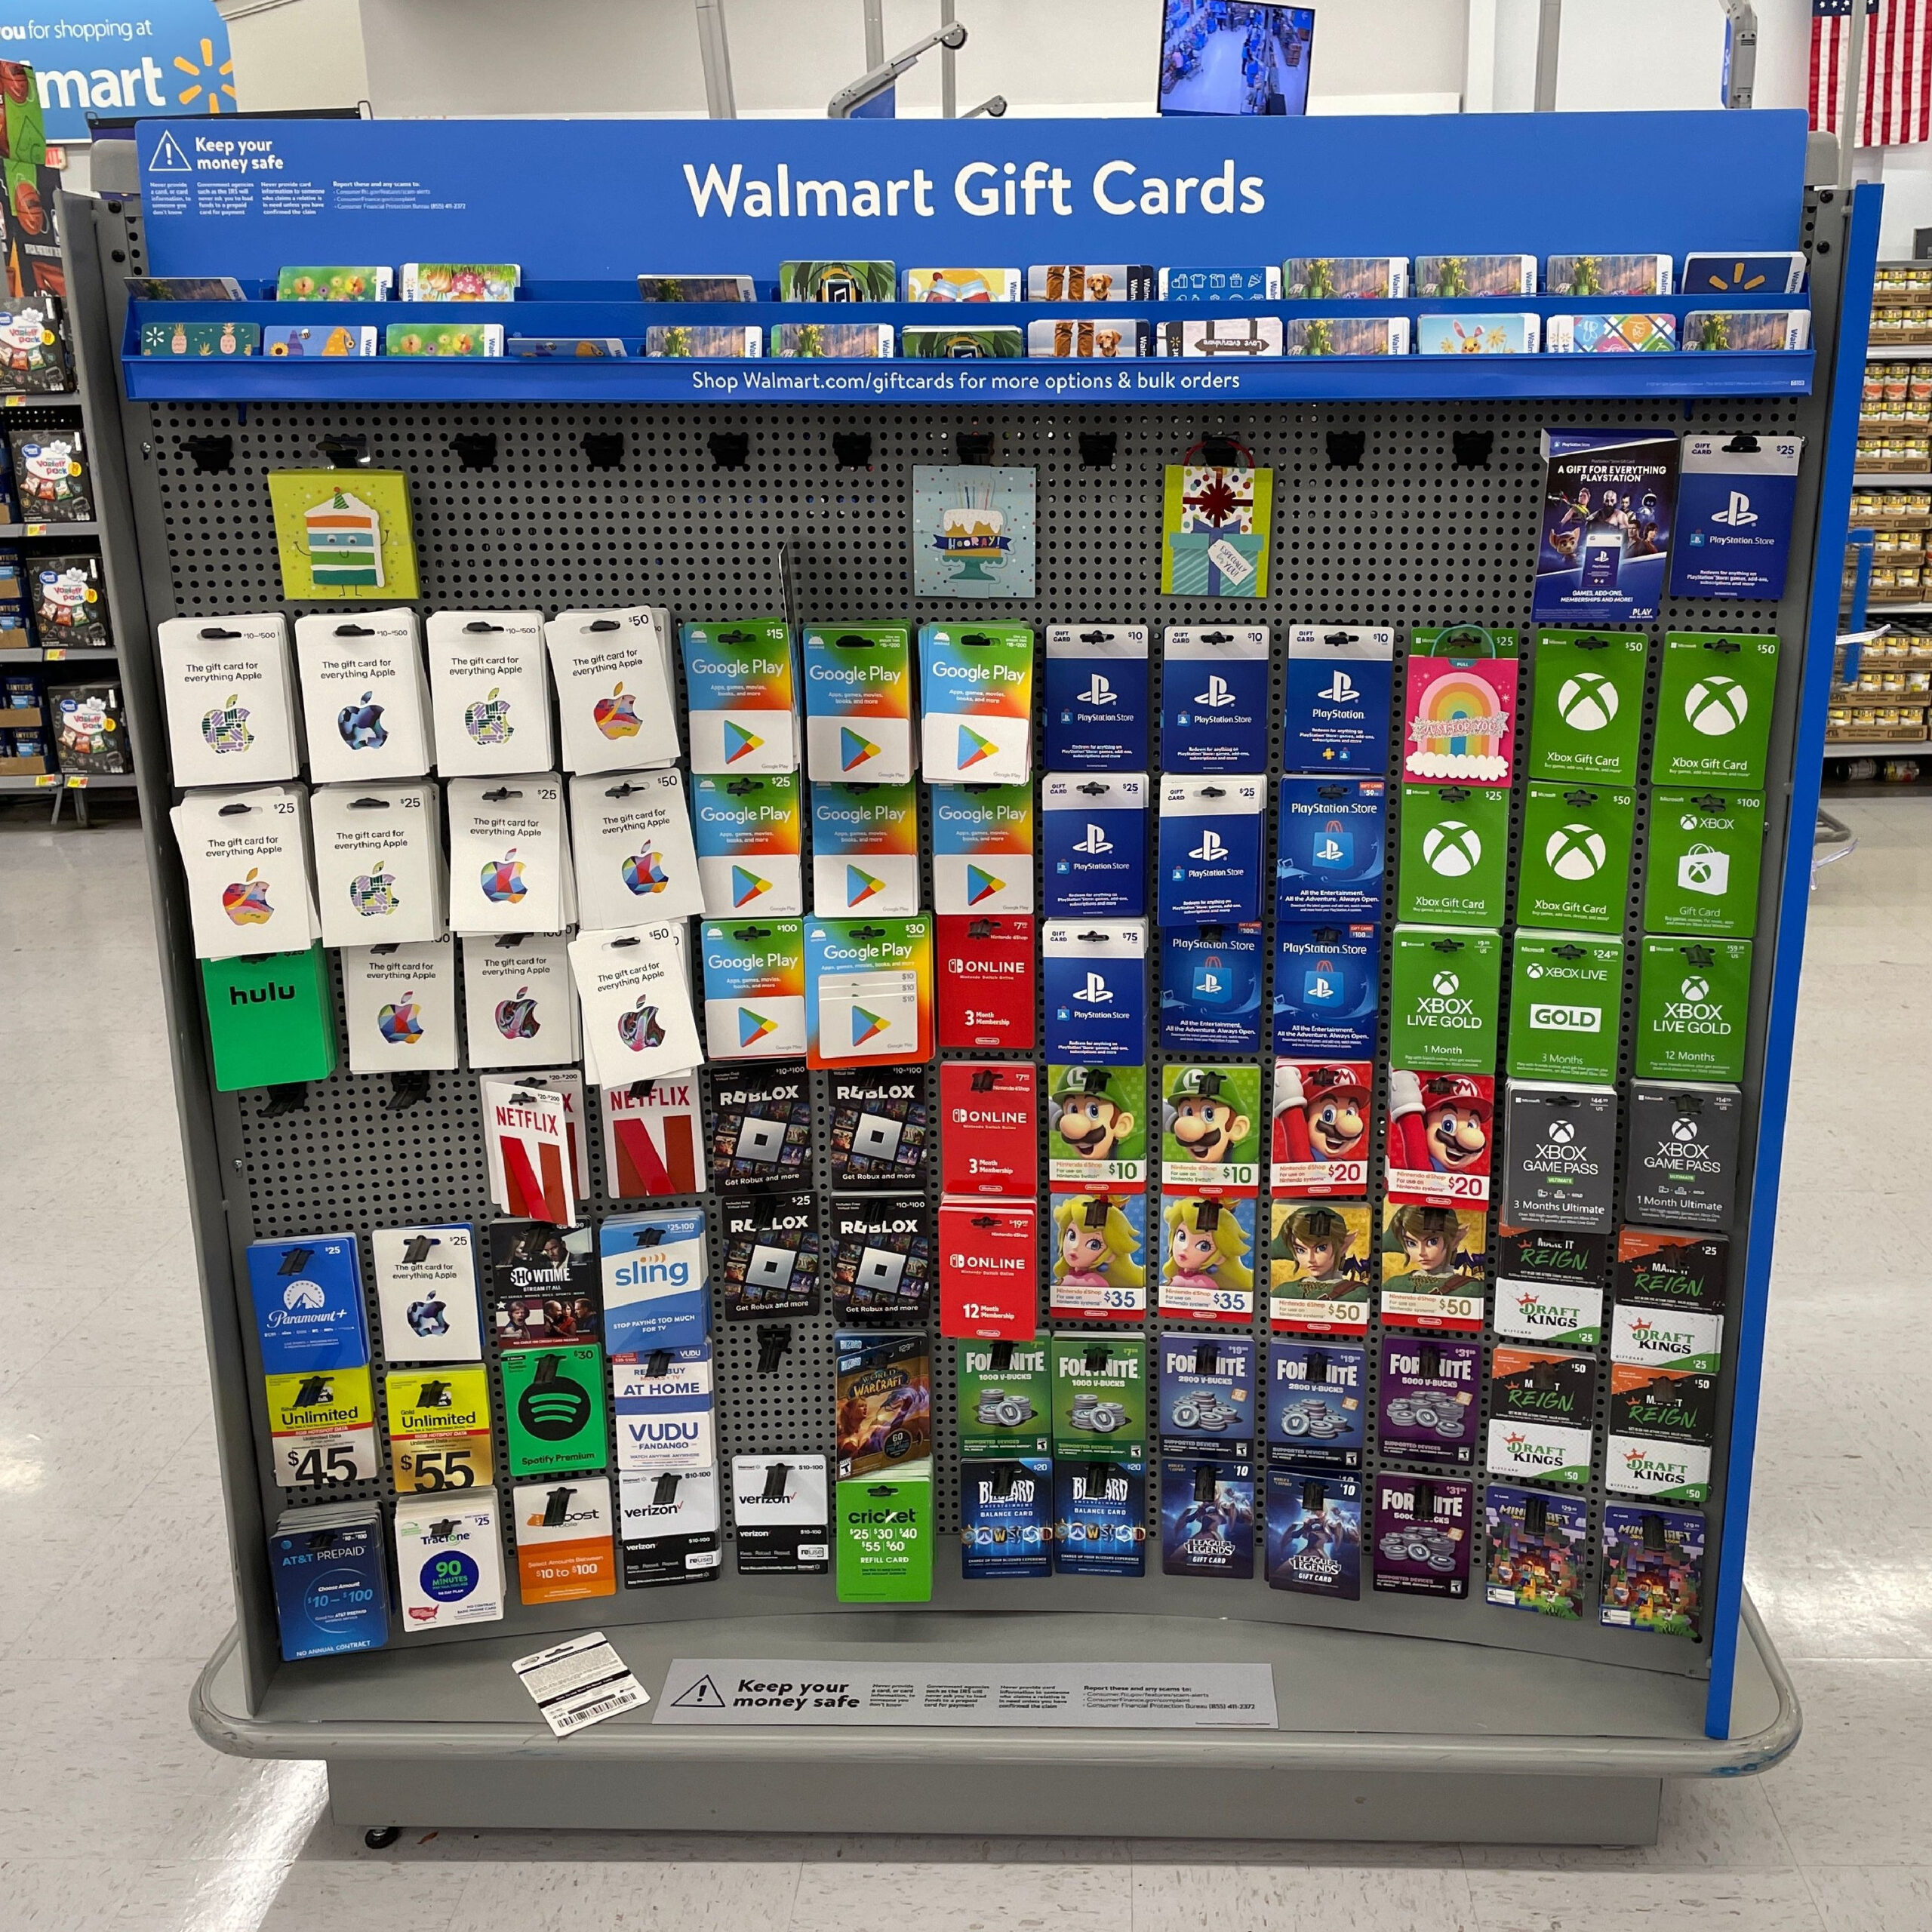 Walmart Must Pay Customers 4M After Gift Card SchemeFind Out How To